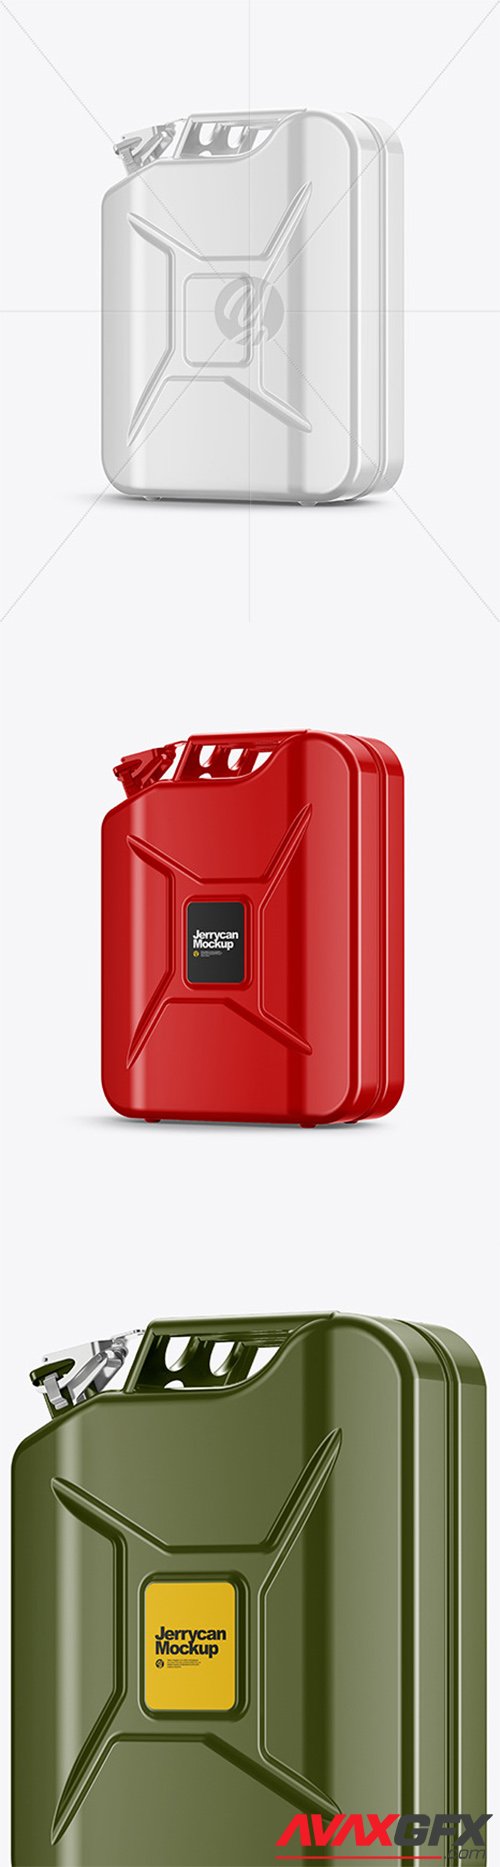 Fuel Jerrycan - Half Side View 79757